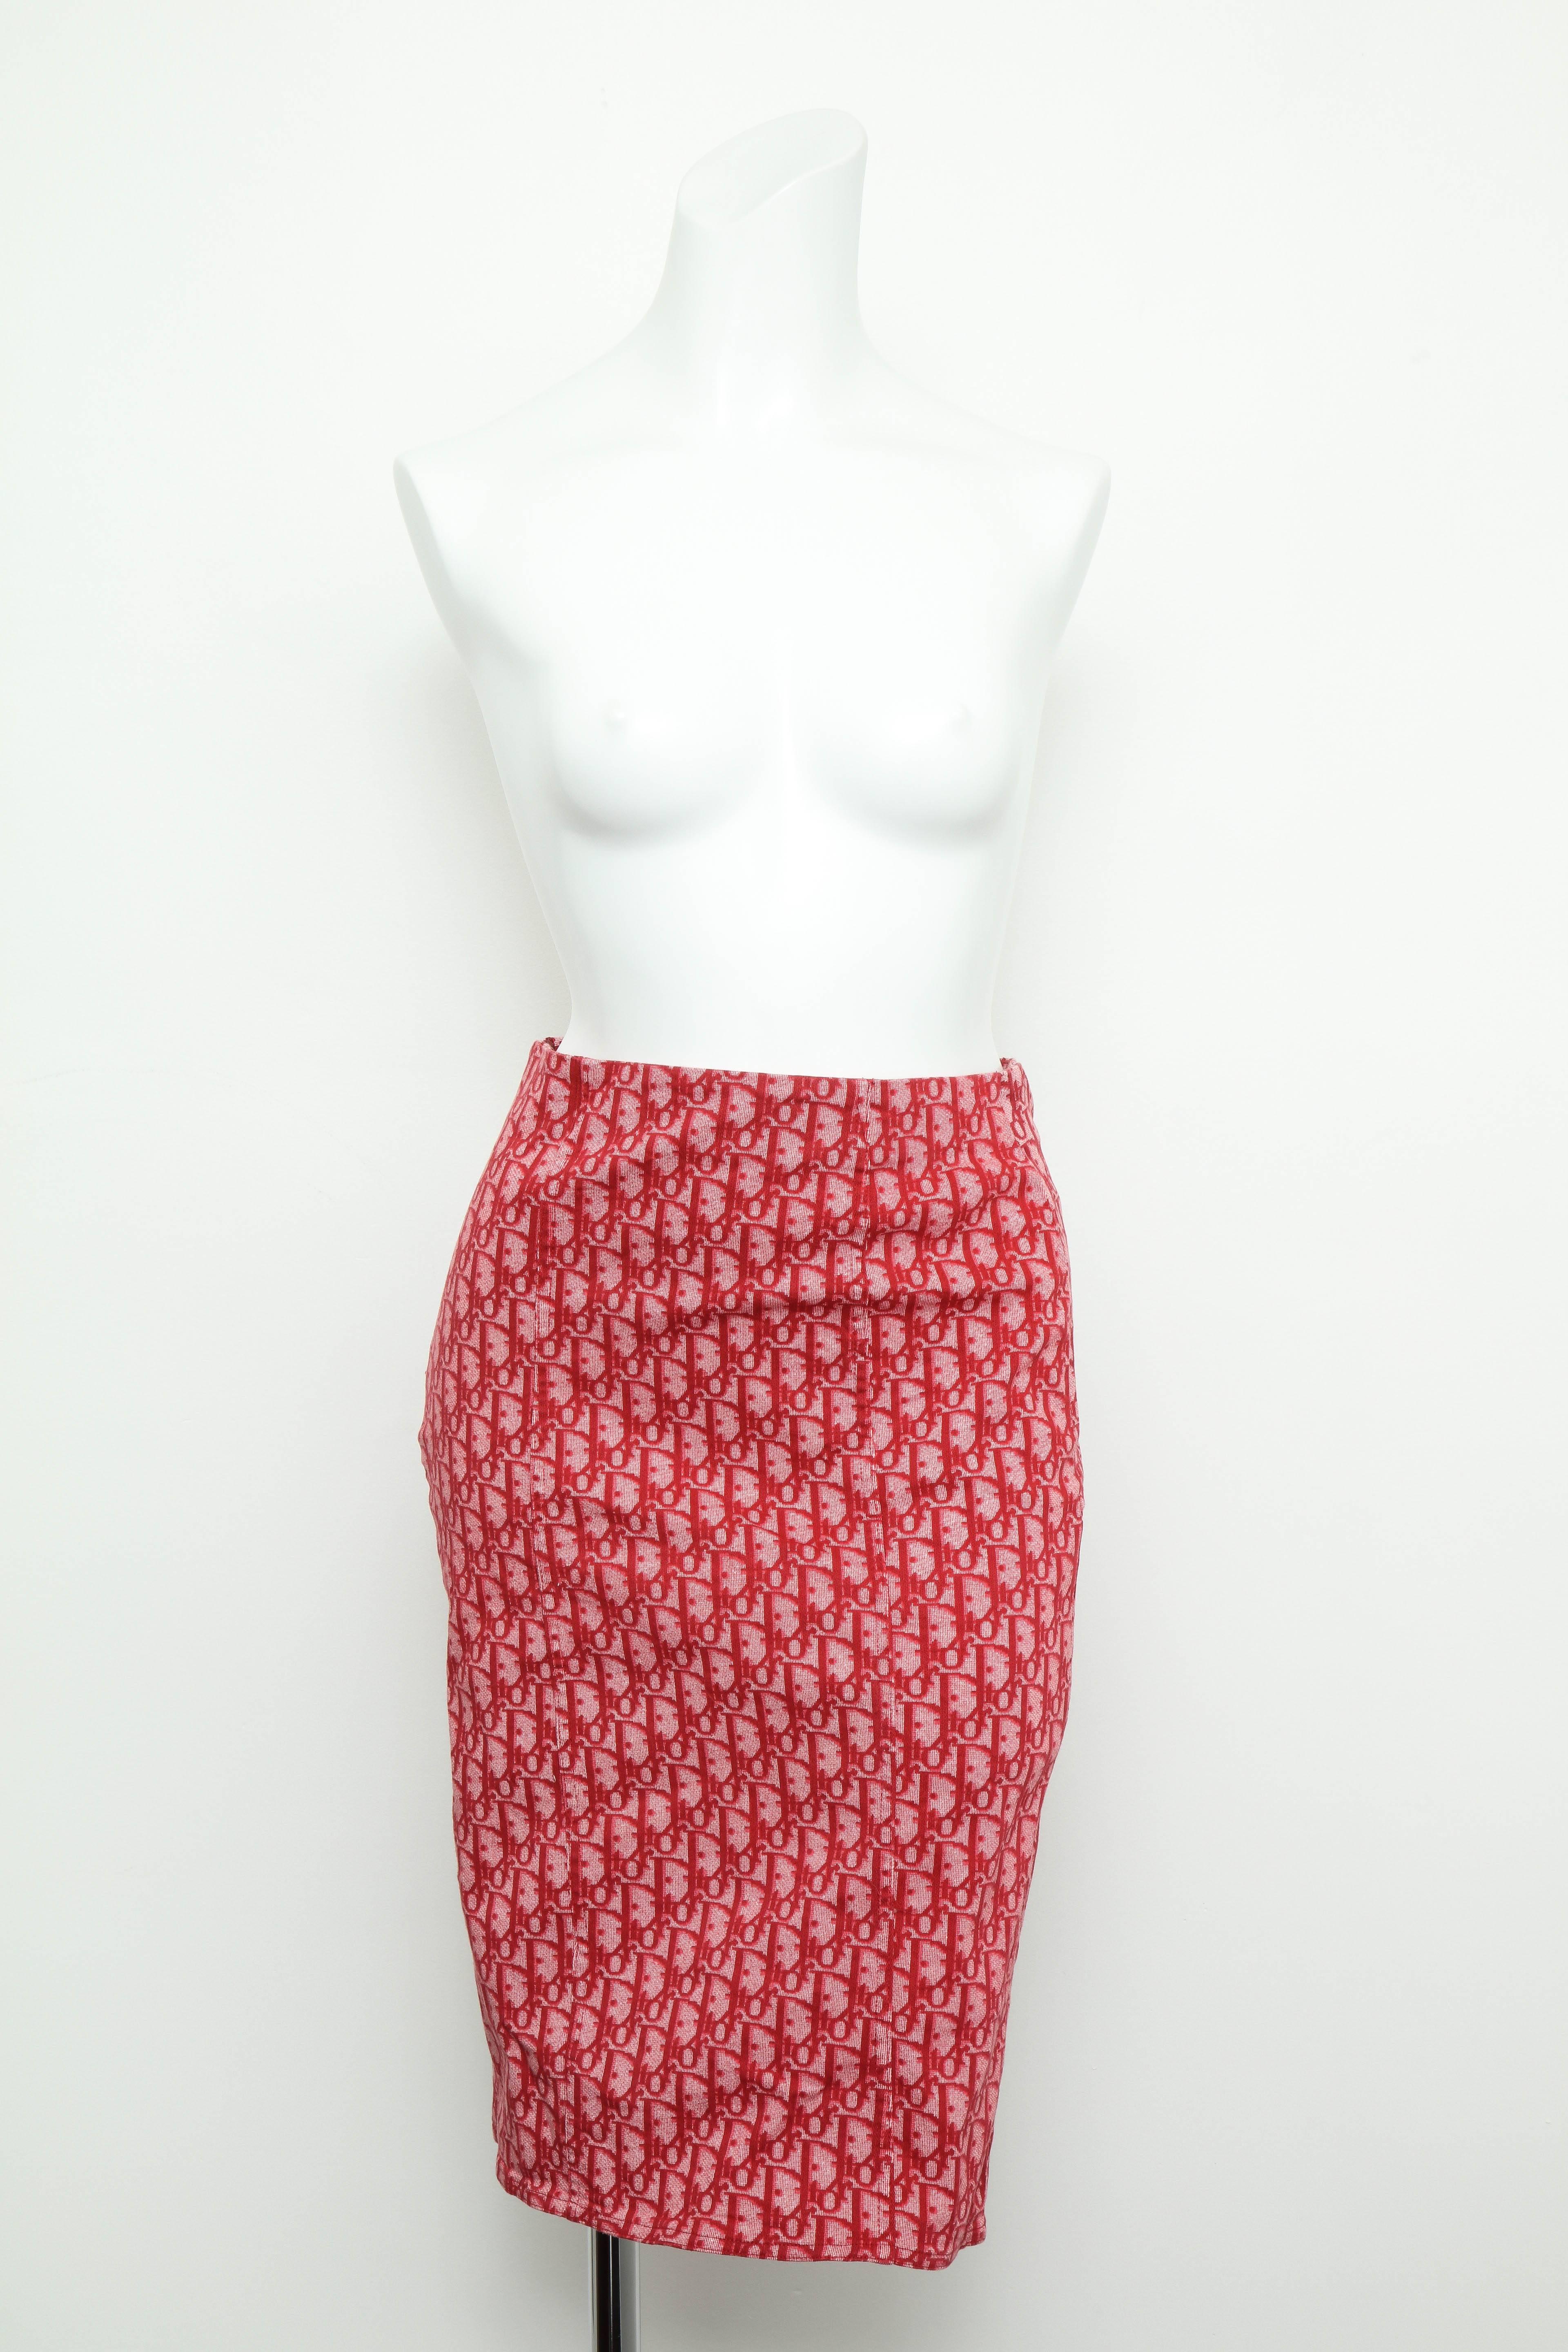 Very rare Christian Dior by John Galliano red trotter logo pencil skirt
 
FR Size 38